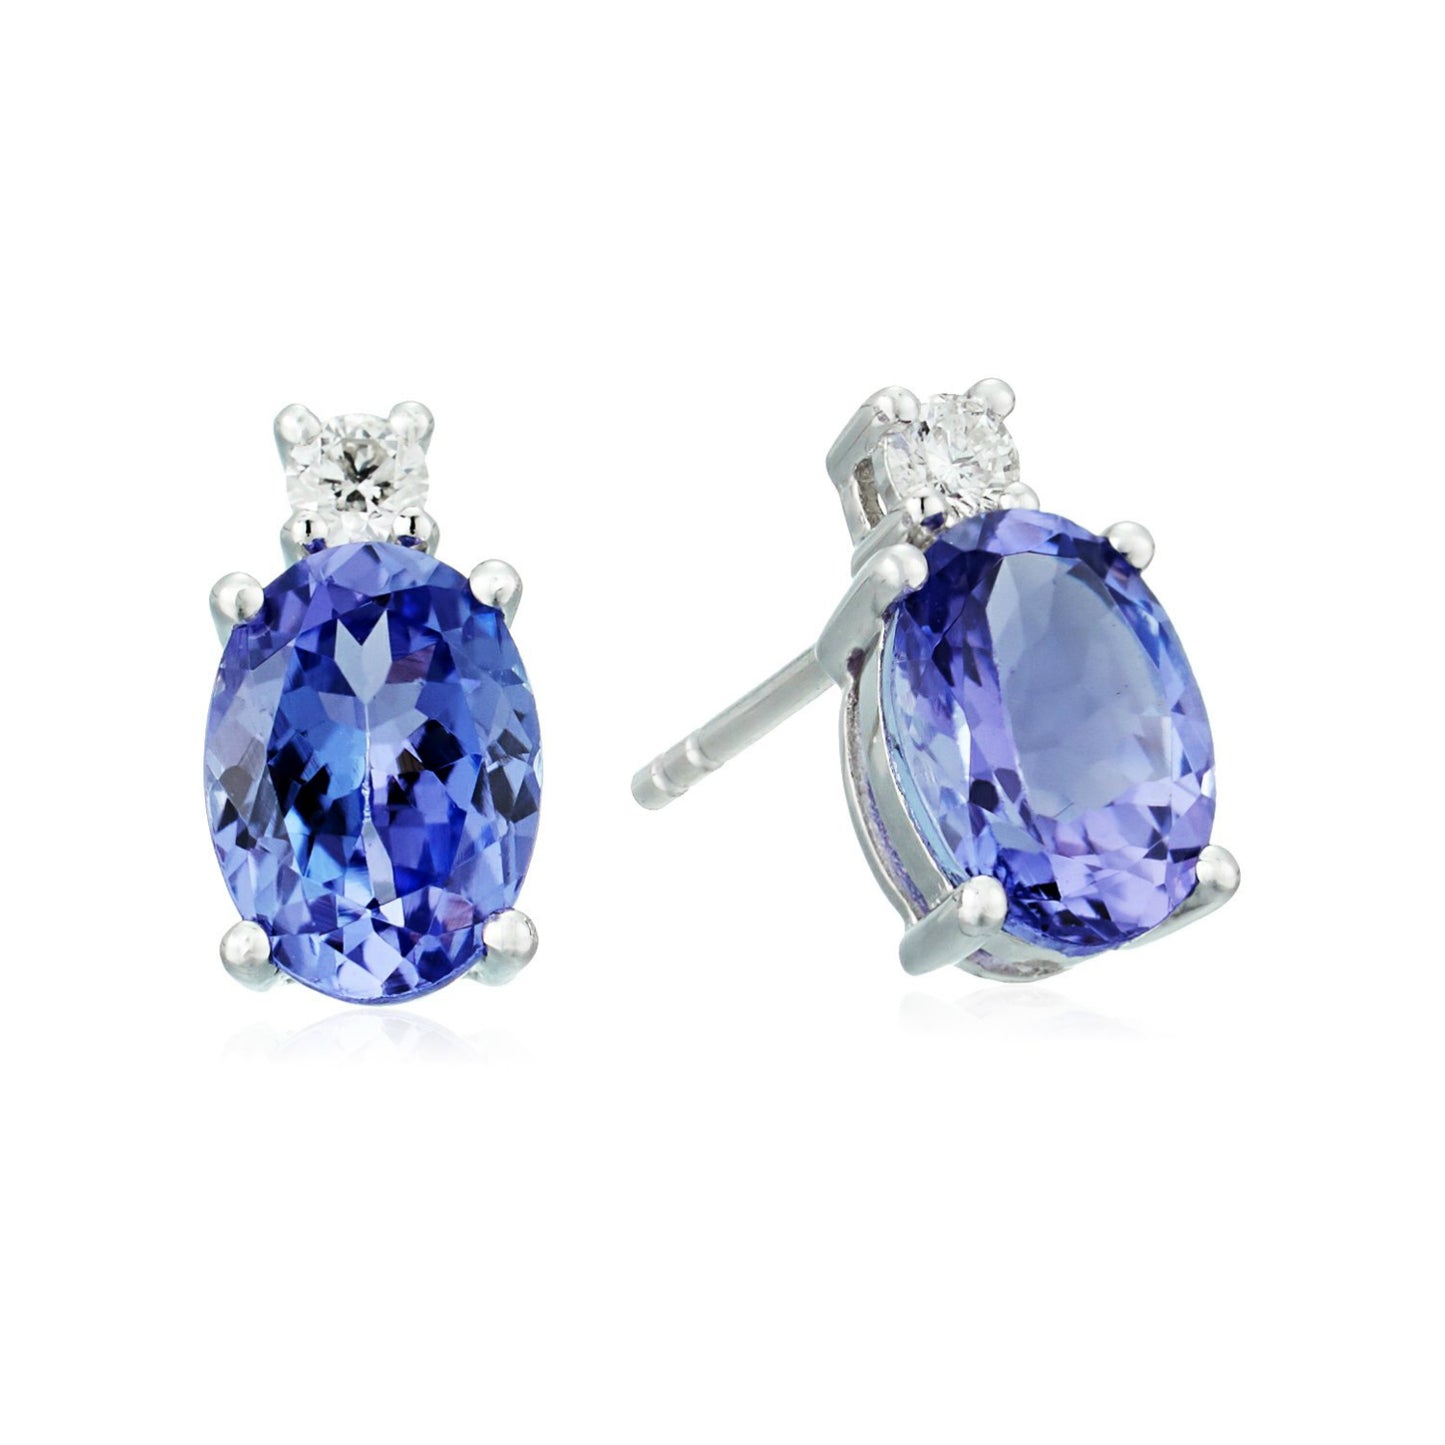 Pinctore 14k White Gold 2 cttw Oval Tanzanite and Diamond Stud Earrings